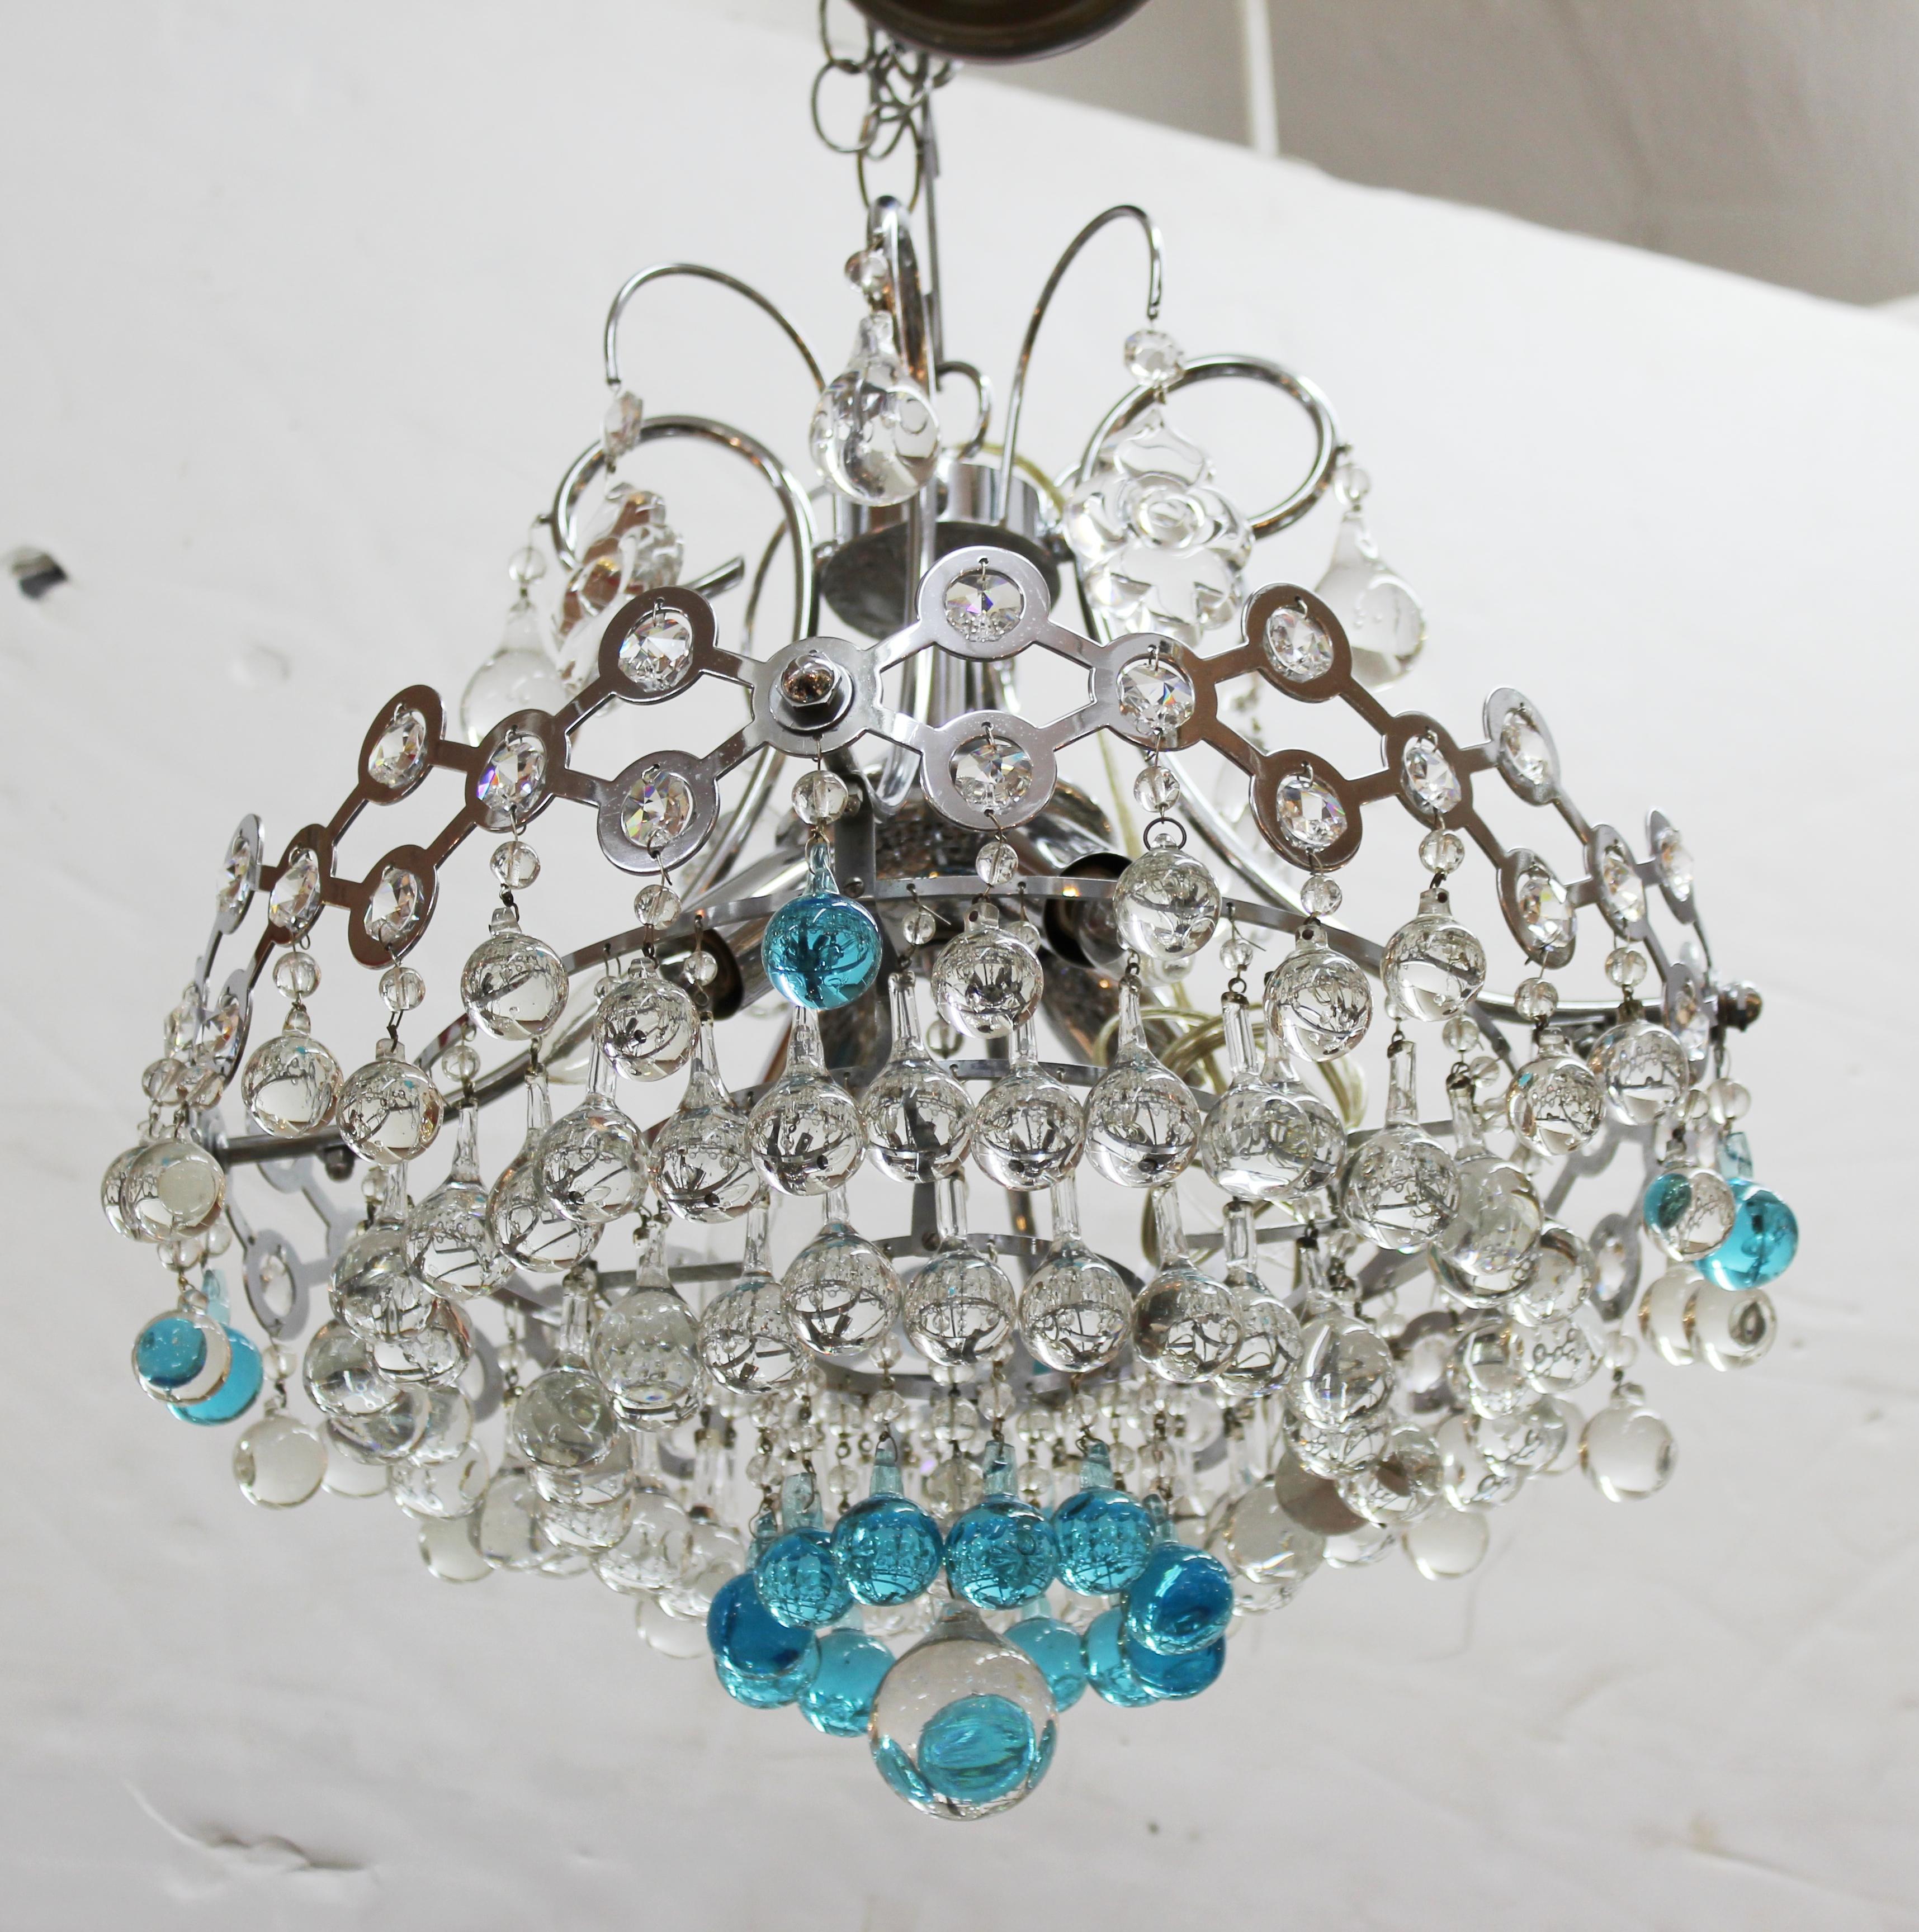 Mid-Century Modern Italian chandelier with chrome structure and handblown hanging clear and turquoise glass balls. The piece has recently been rewired to comply with US standards. In very good vintage condition.